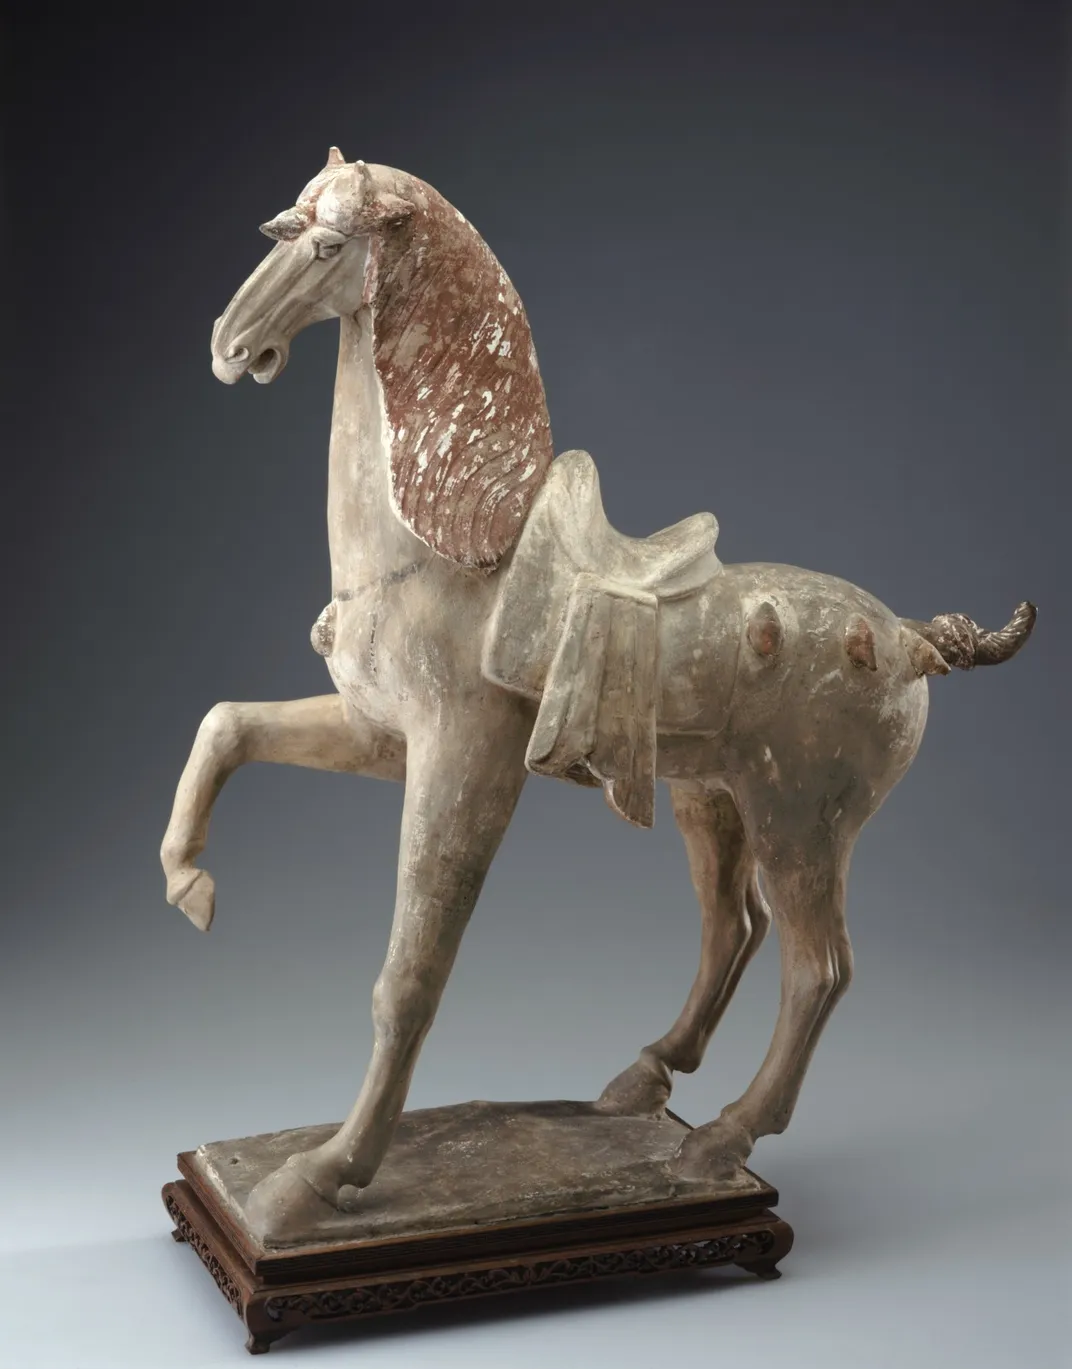 Clay sculpture of a horse with one hoof in the air and decorative bristles on the body and one on the forehead.